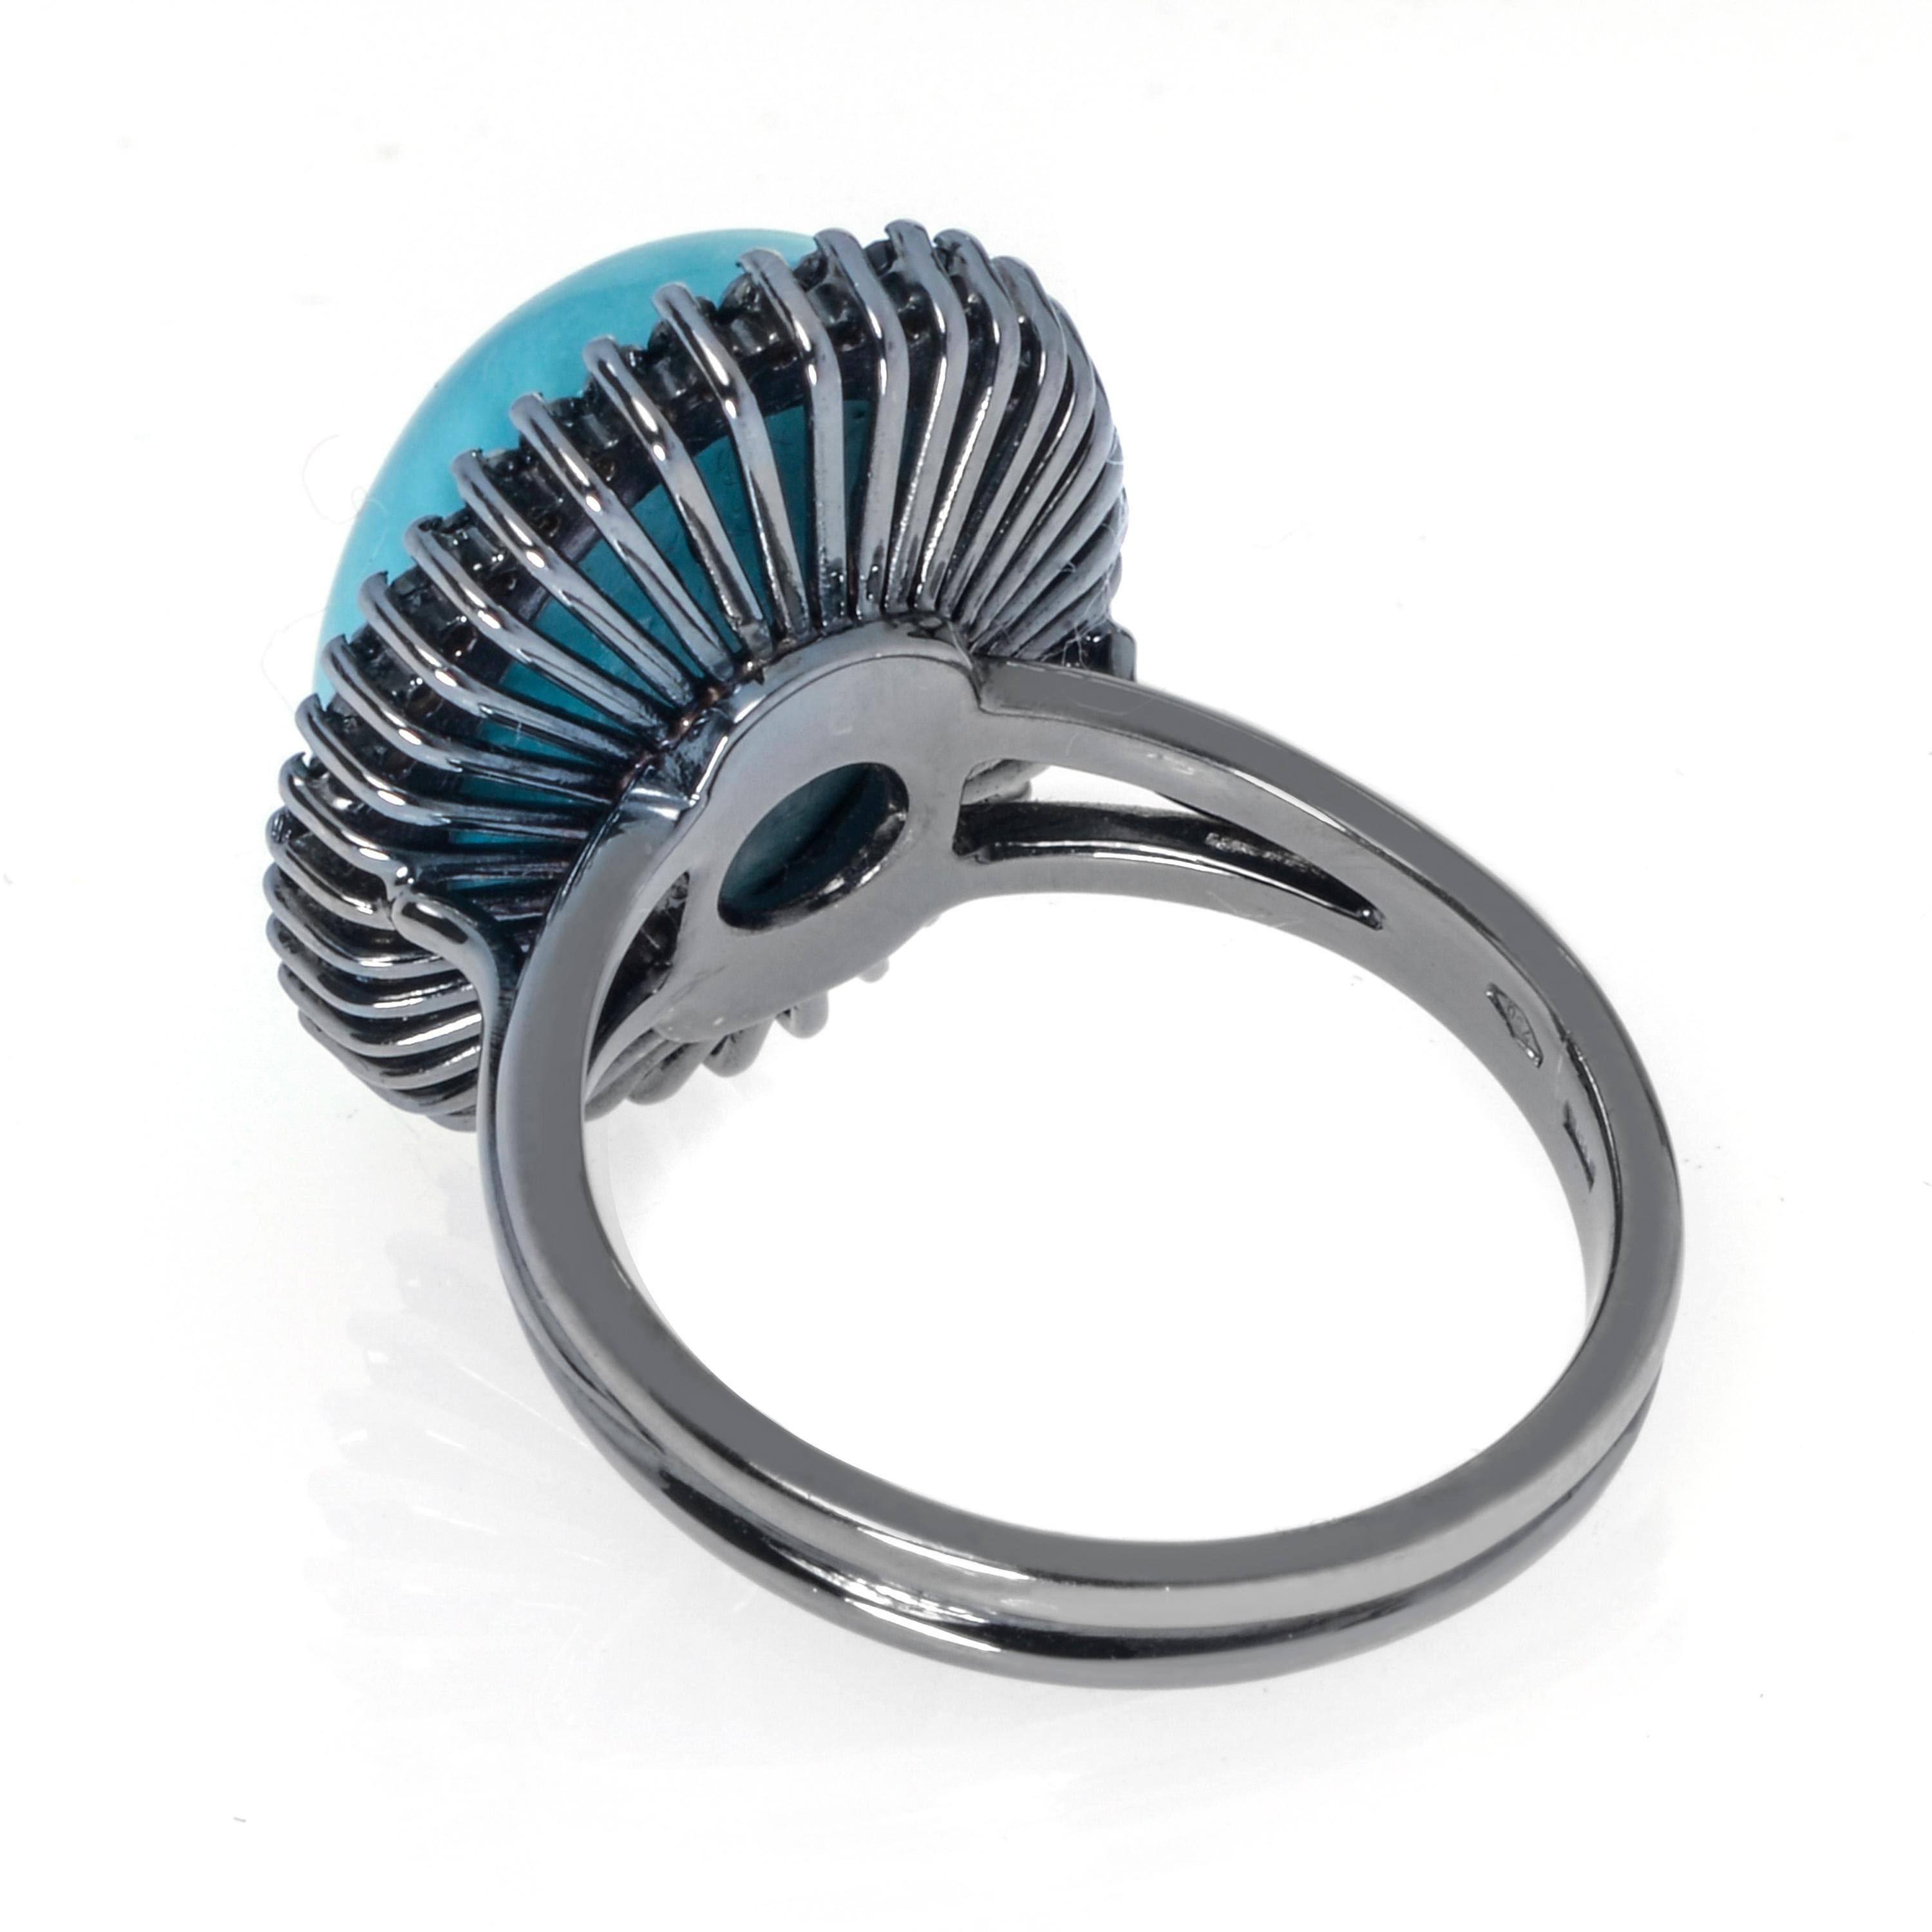 This bold Piero Milano 18K White Gold Statement Ring features an oval 1.05ct turquoise cabochon framed in black diamond pave 0.47ct twd in a rhodium plated white gold setting. The ring size is 7. The Decoration Size is 16mm x 20mm. The Weight is 8g.